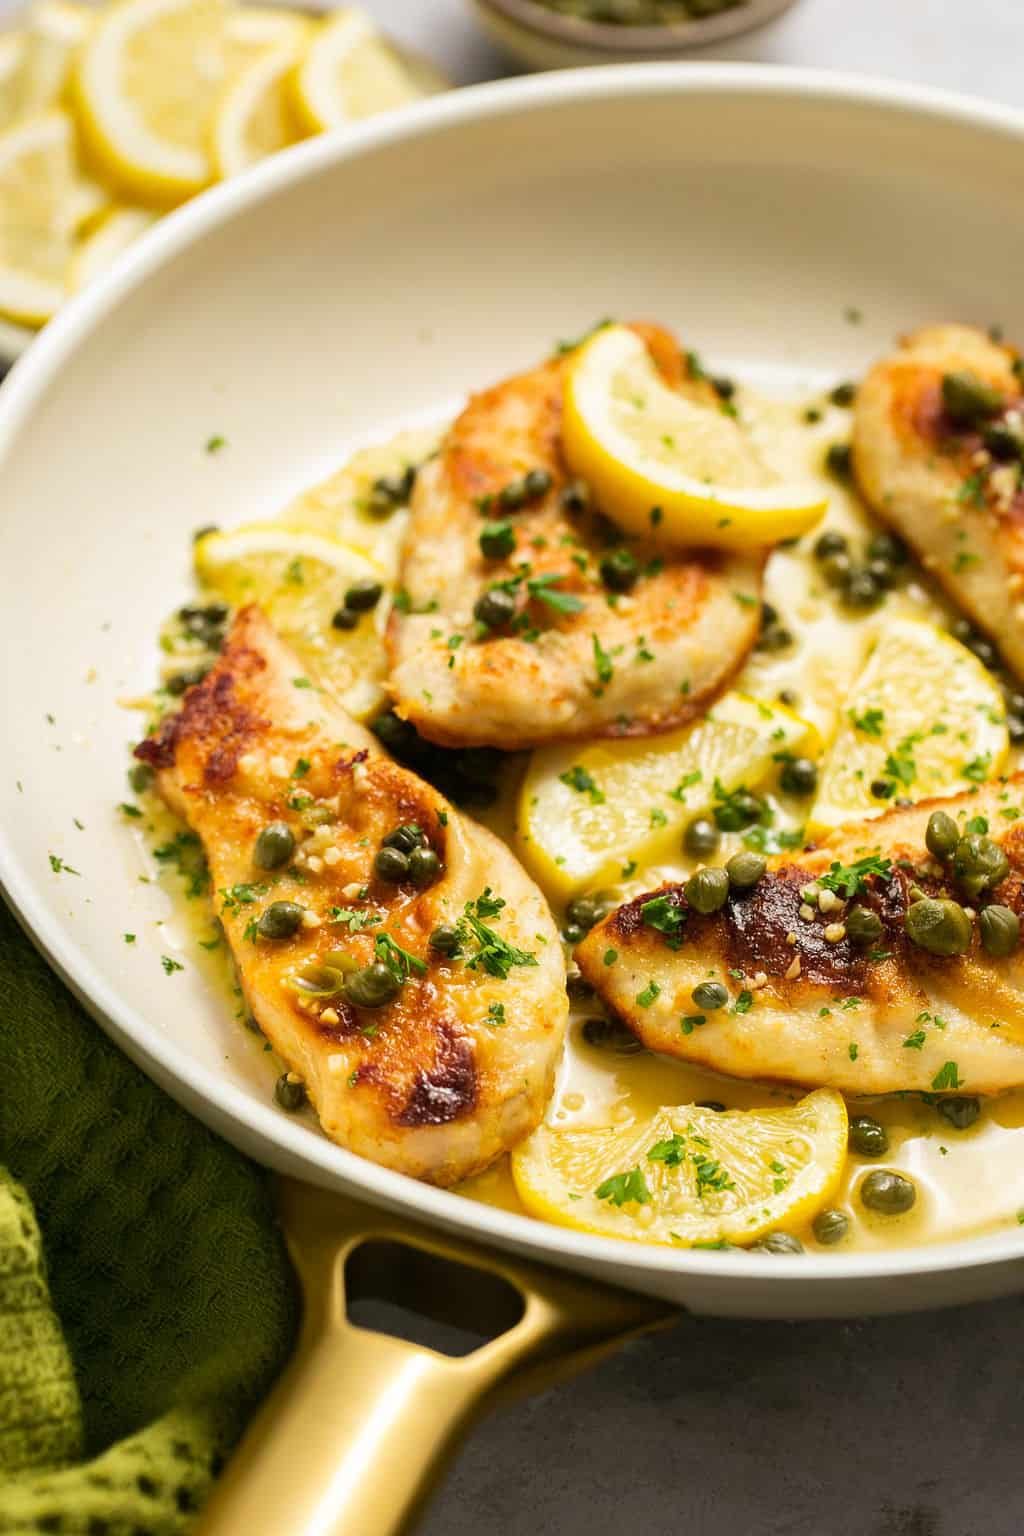 Chicken topped with capers and lemon slices.